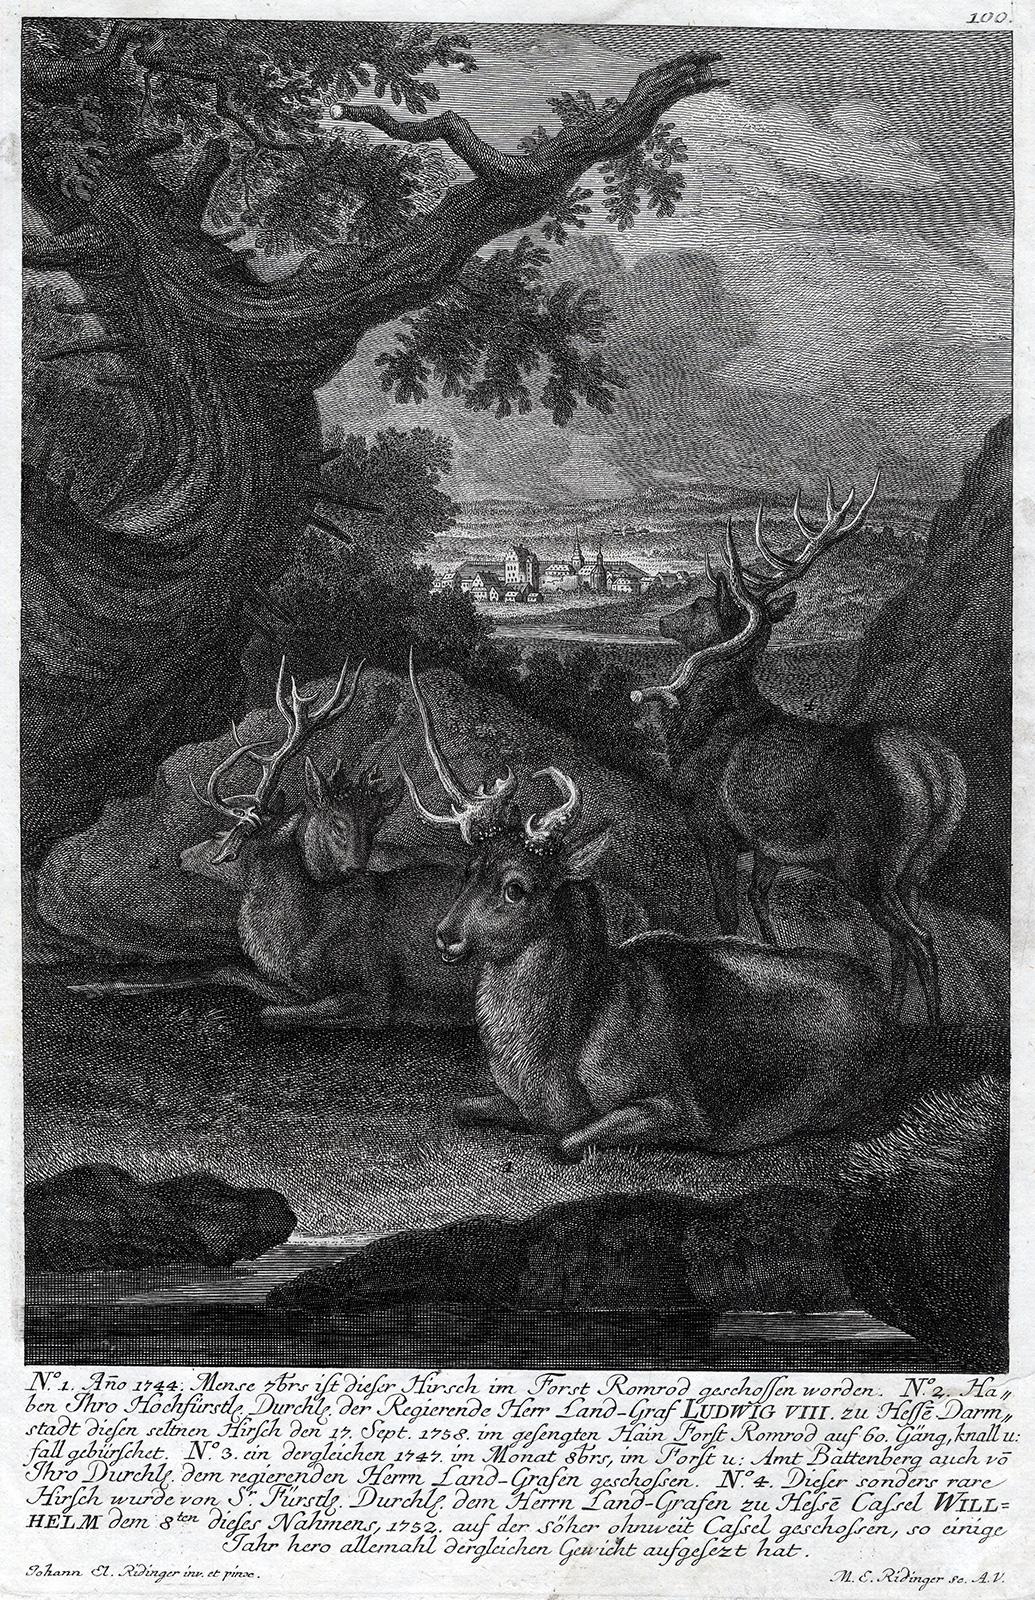 Martin Elias Ridinger Landscape Print - Antique hunting scene print in Romrod forest by Ridinger - Engraving - 18th c